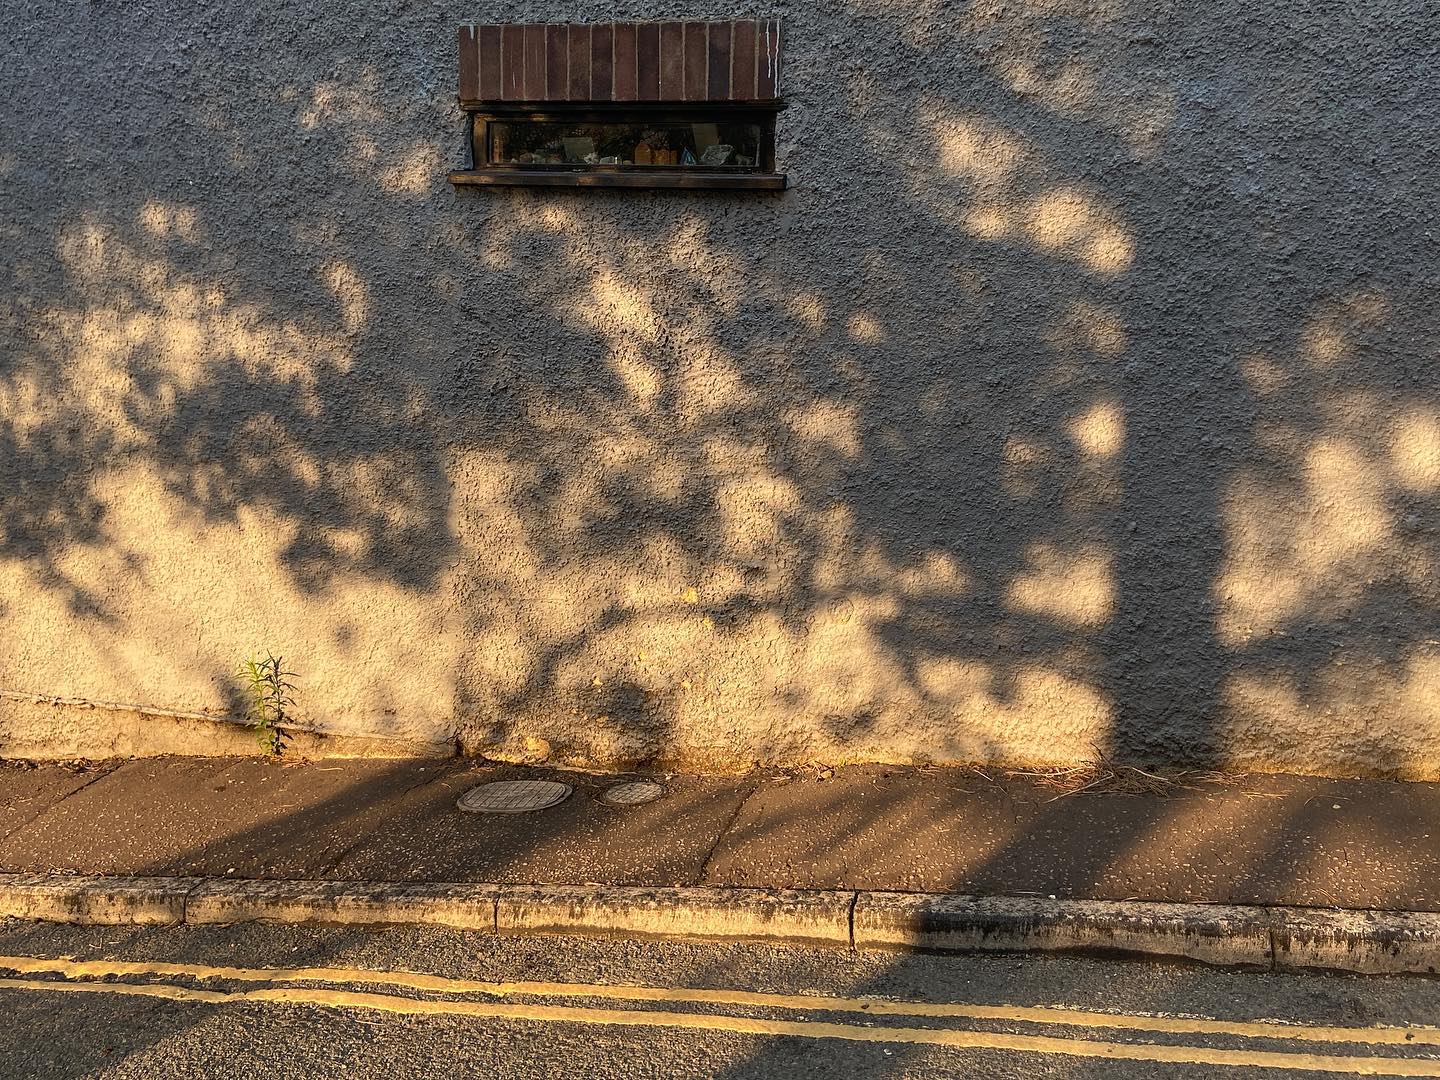 shadows of trees on a textured exterior wall, yellow sunset echoes in double yellow lines. one window